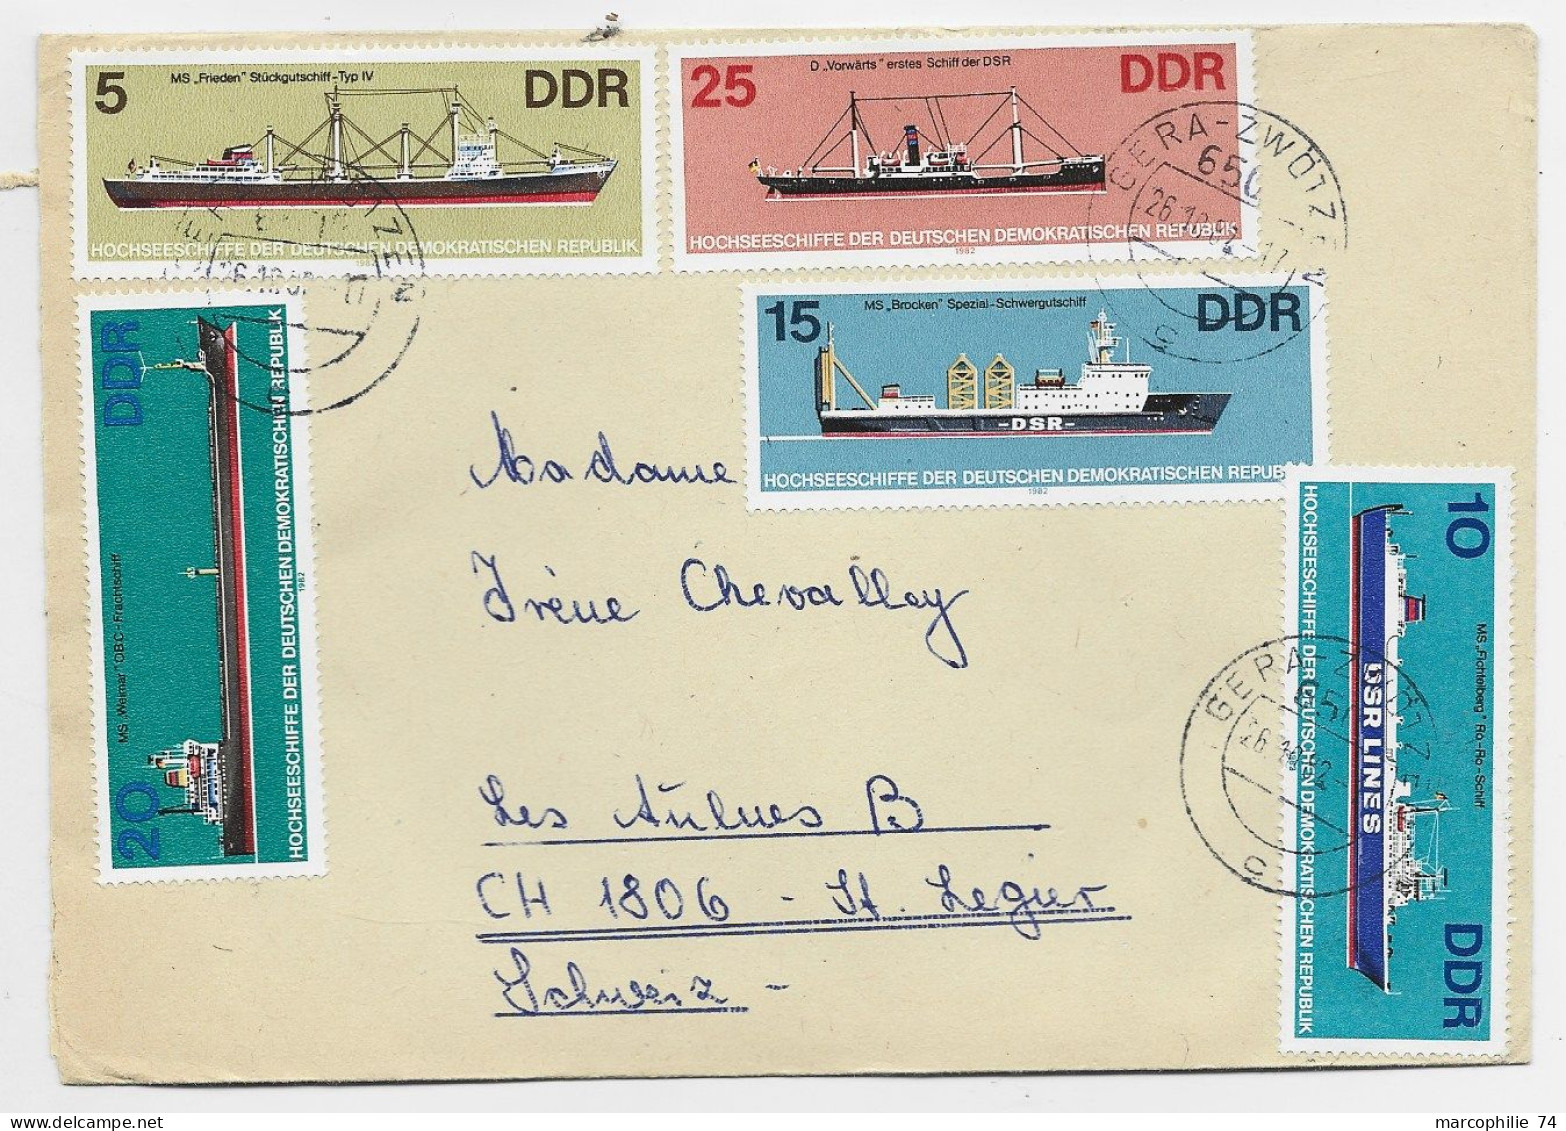 GERMARNY DDR BOAT LETTRE COVER  BRIEF GERA 1982 TO SUISSE - Covers & Documents